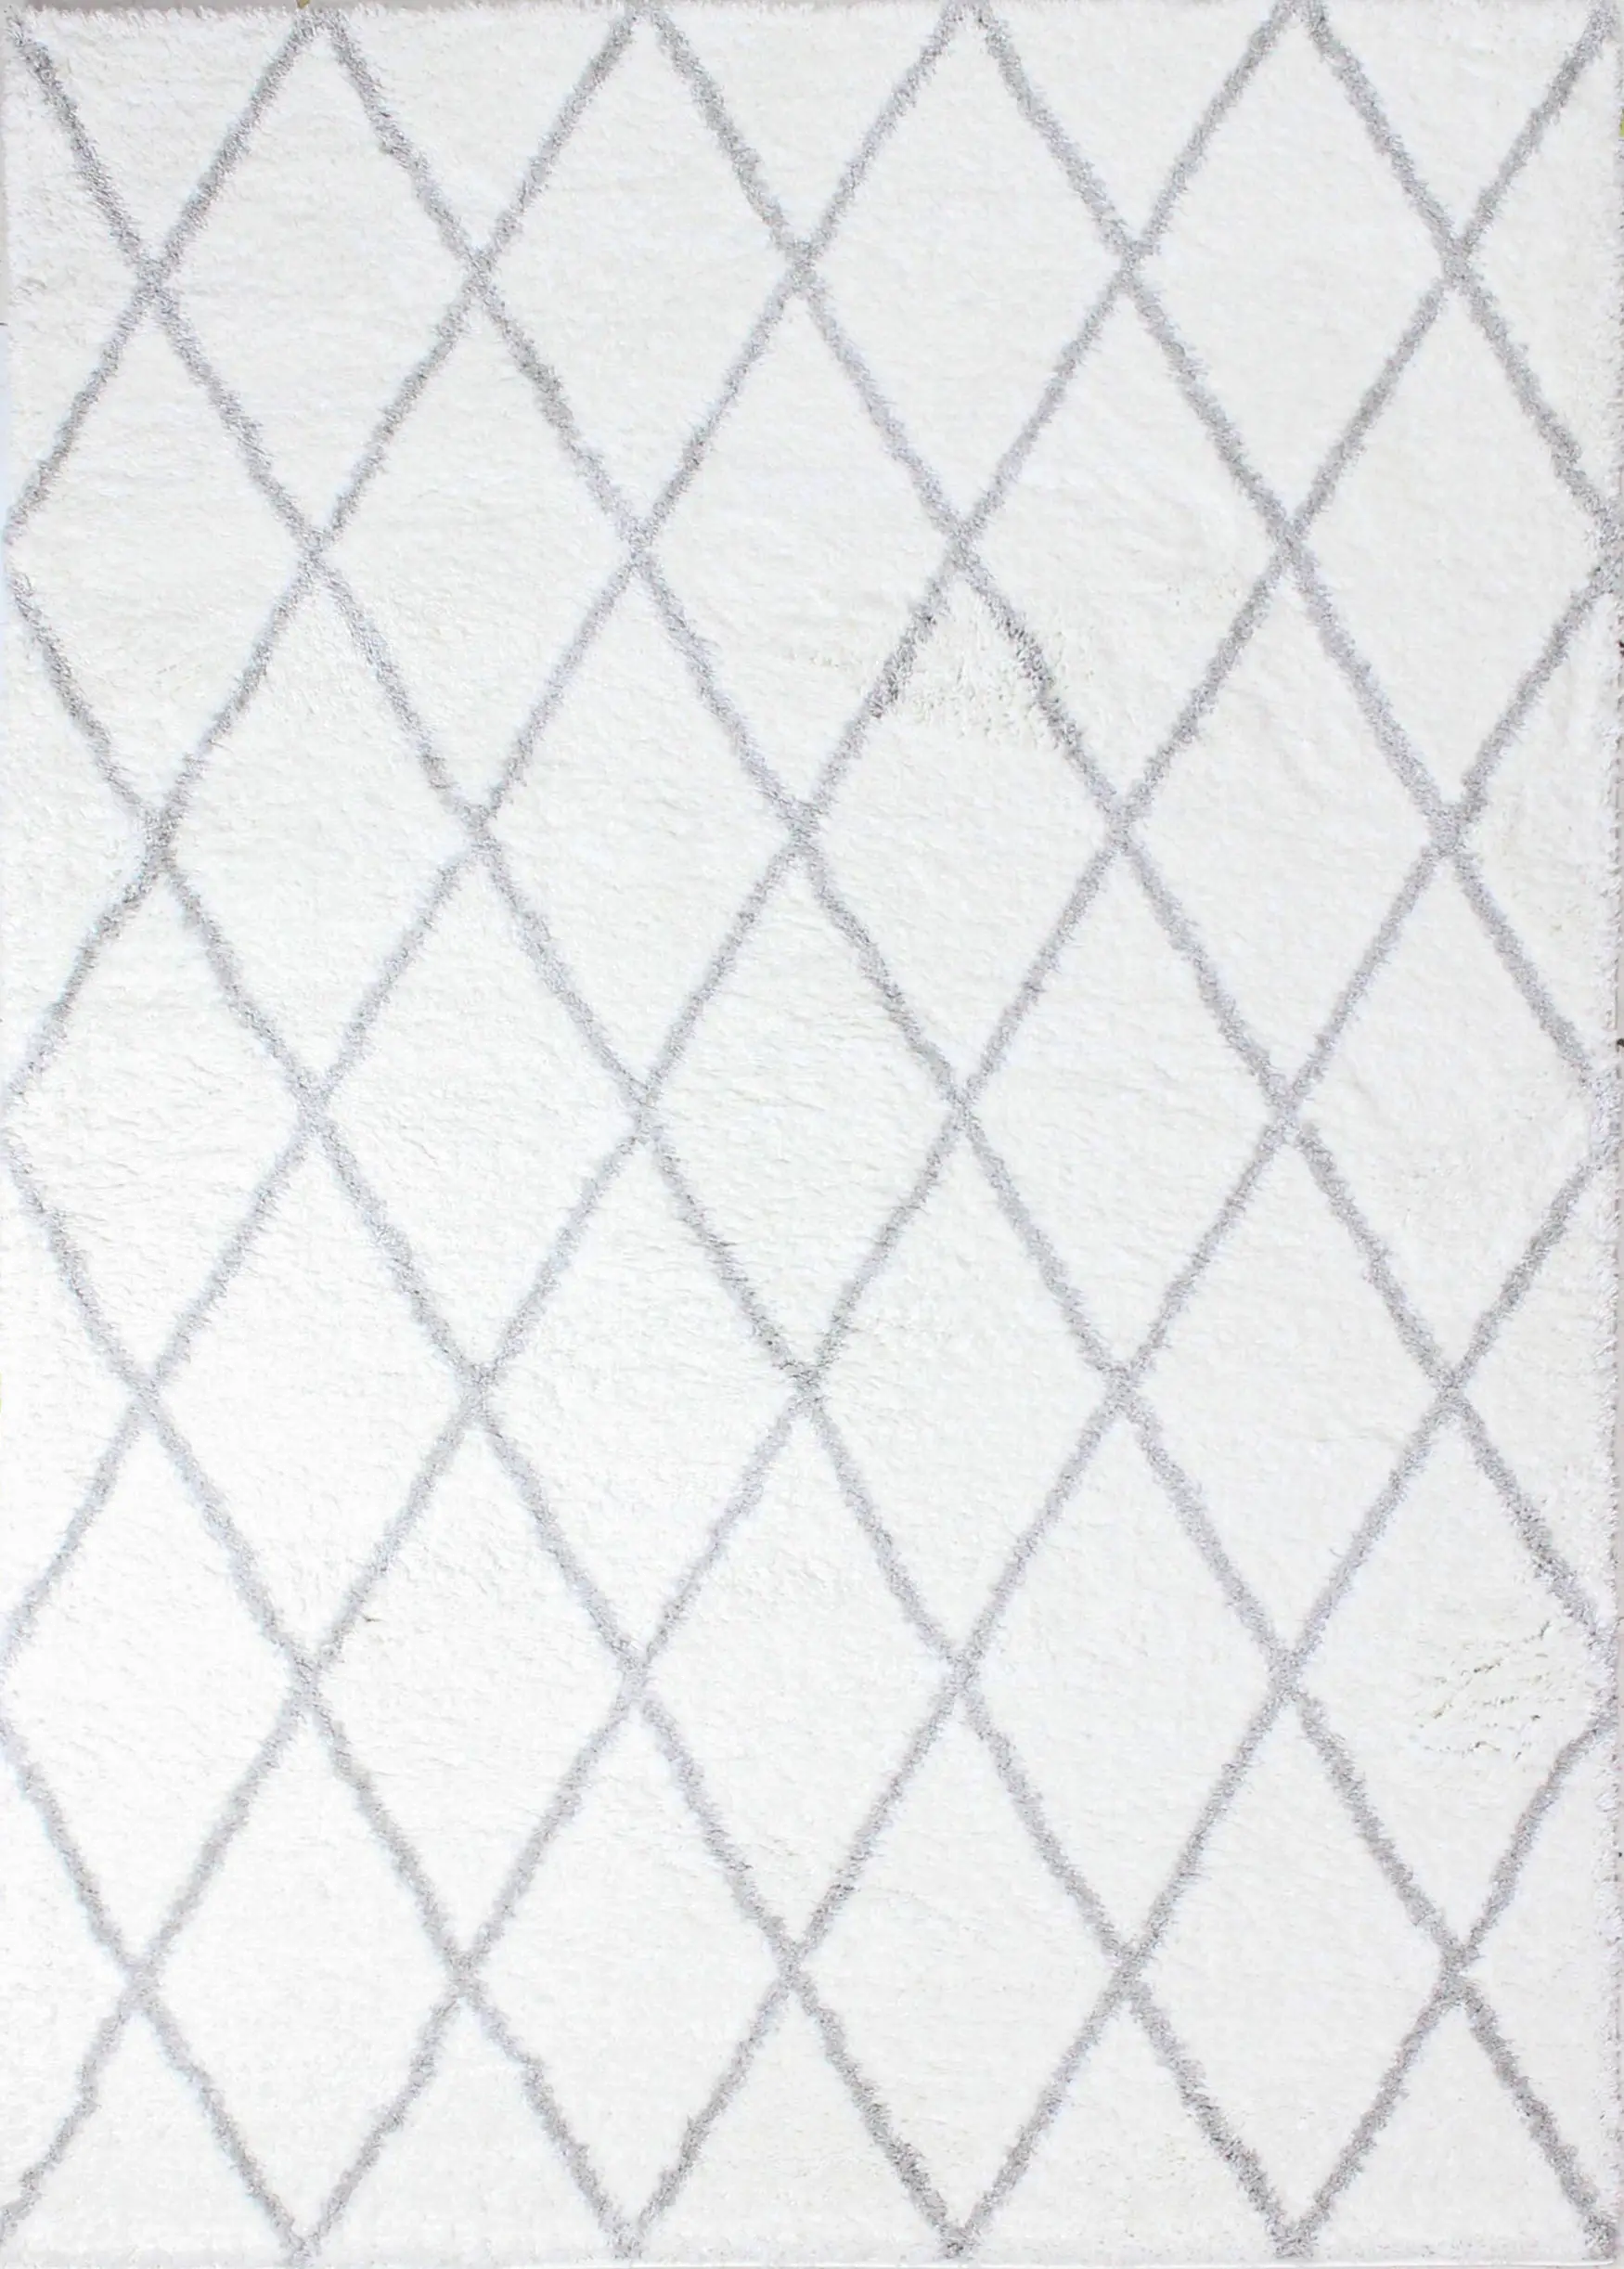 Faris White and Gray 5 x 8 Area Rug